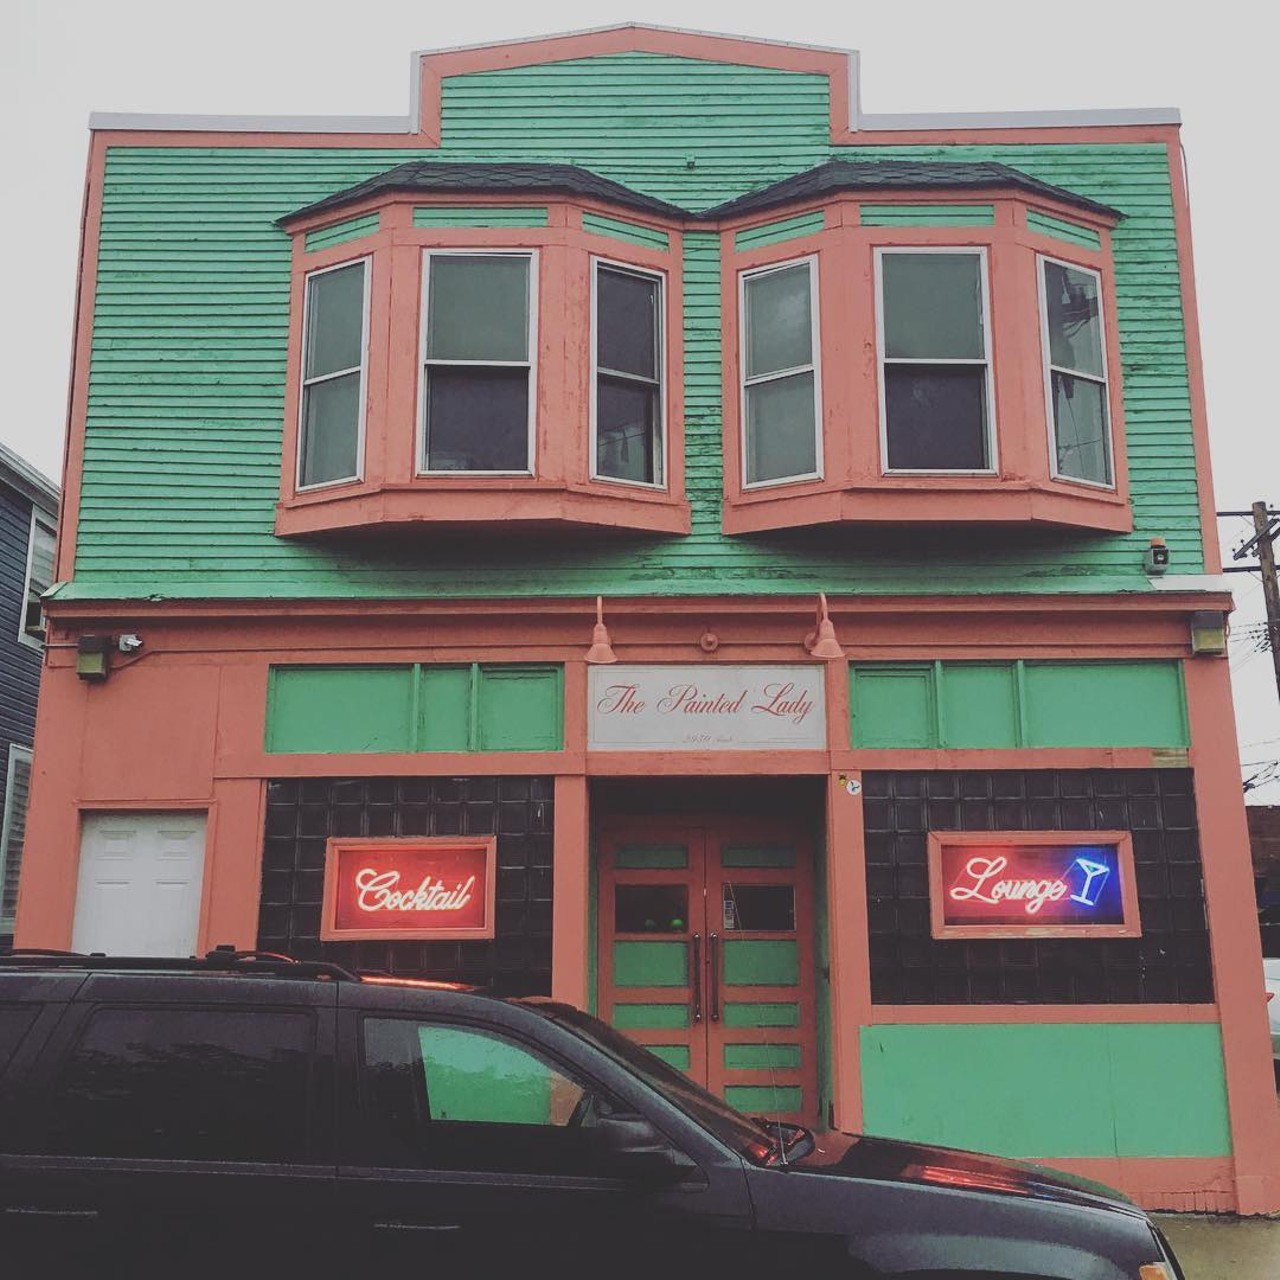 The Painted Lady
2930 Jacob St, Hamtramck
(313)-874-2991
With the TV barely running, this Hamtramck bar is a great place to throw a few back and never have to worry about hearing the word &#147;email.&#148;
Photo via IG user @prkoch